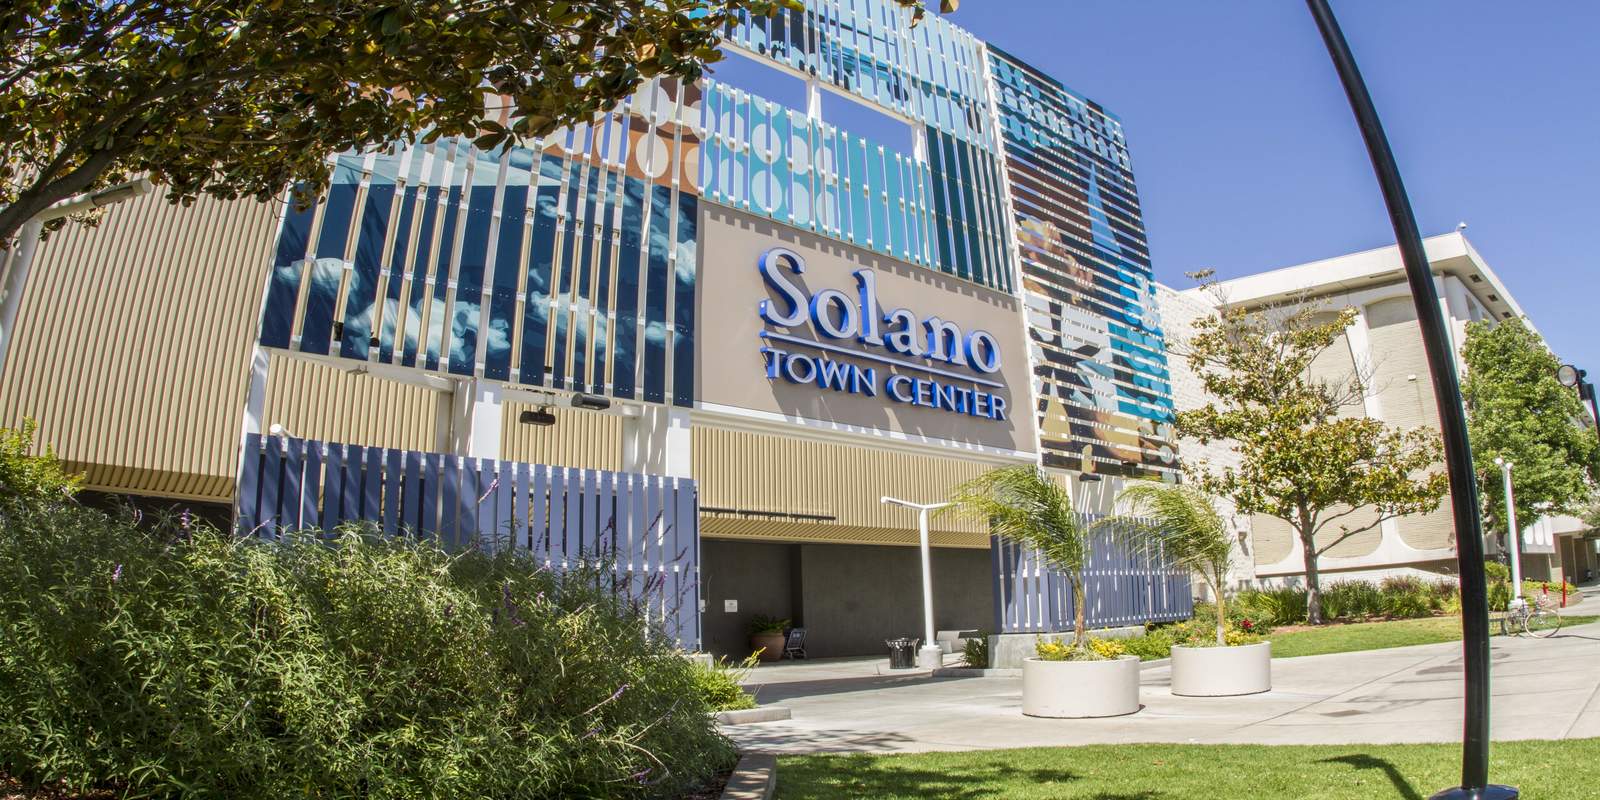 Image of Solano Town Center